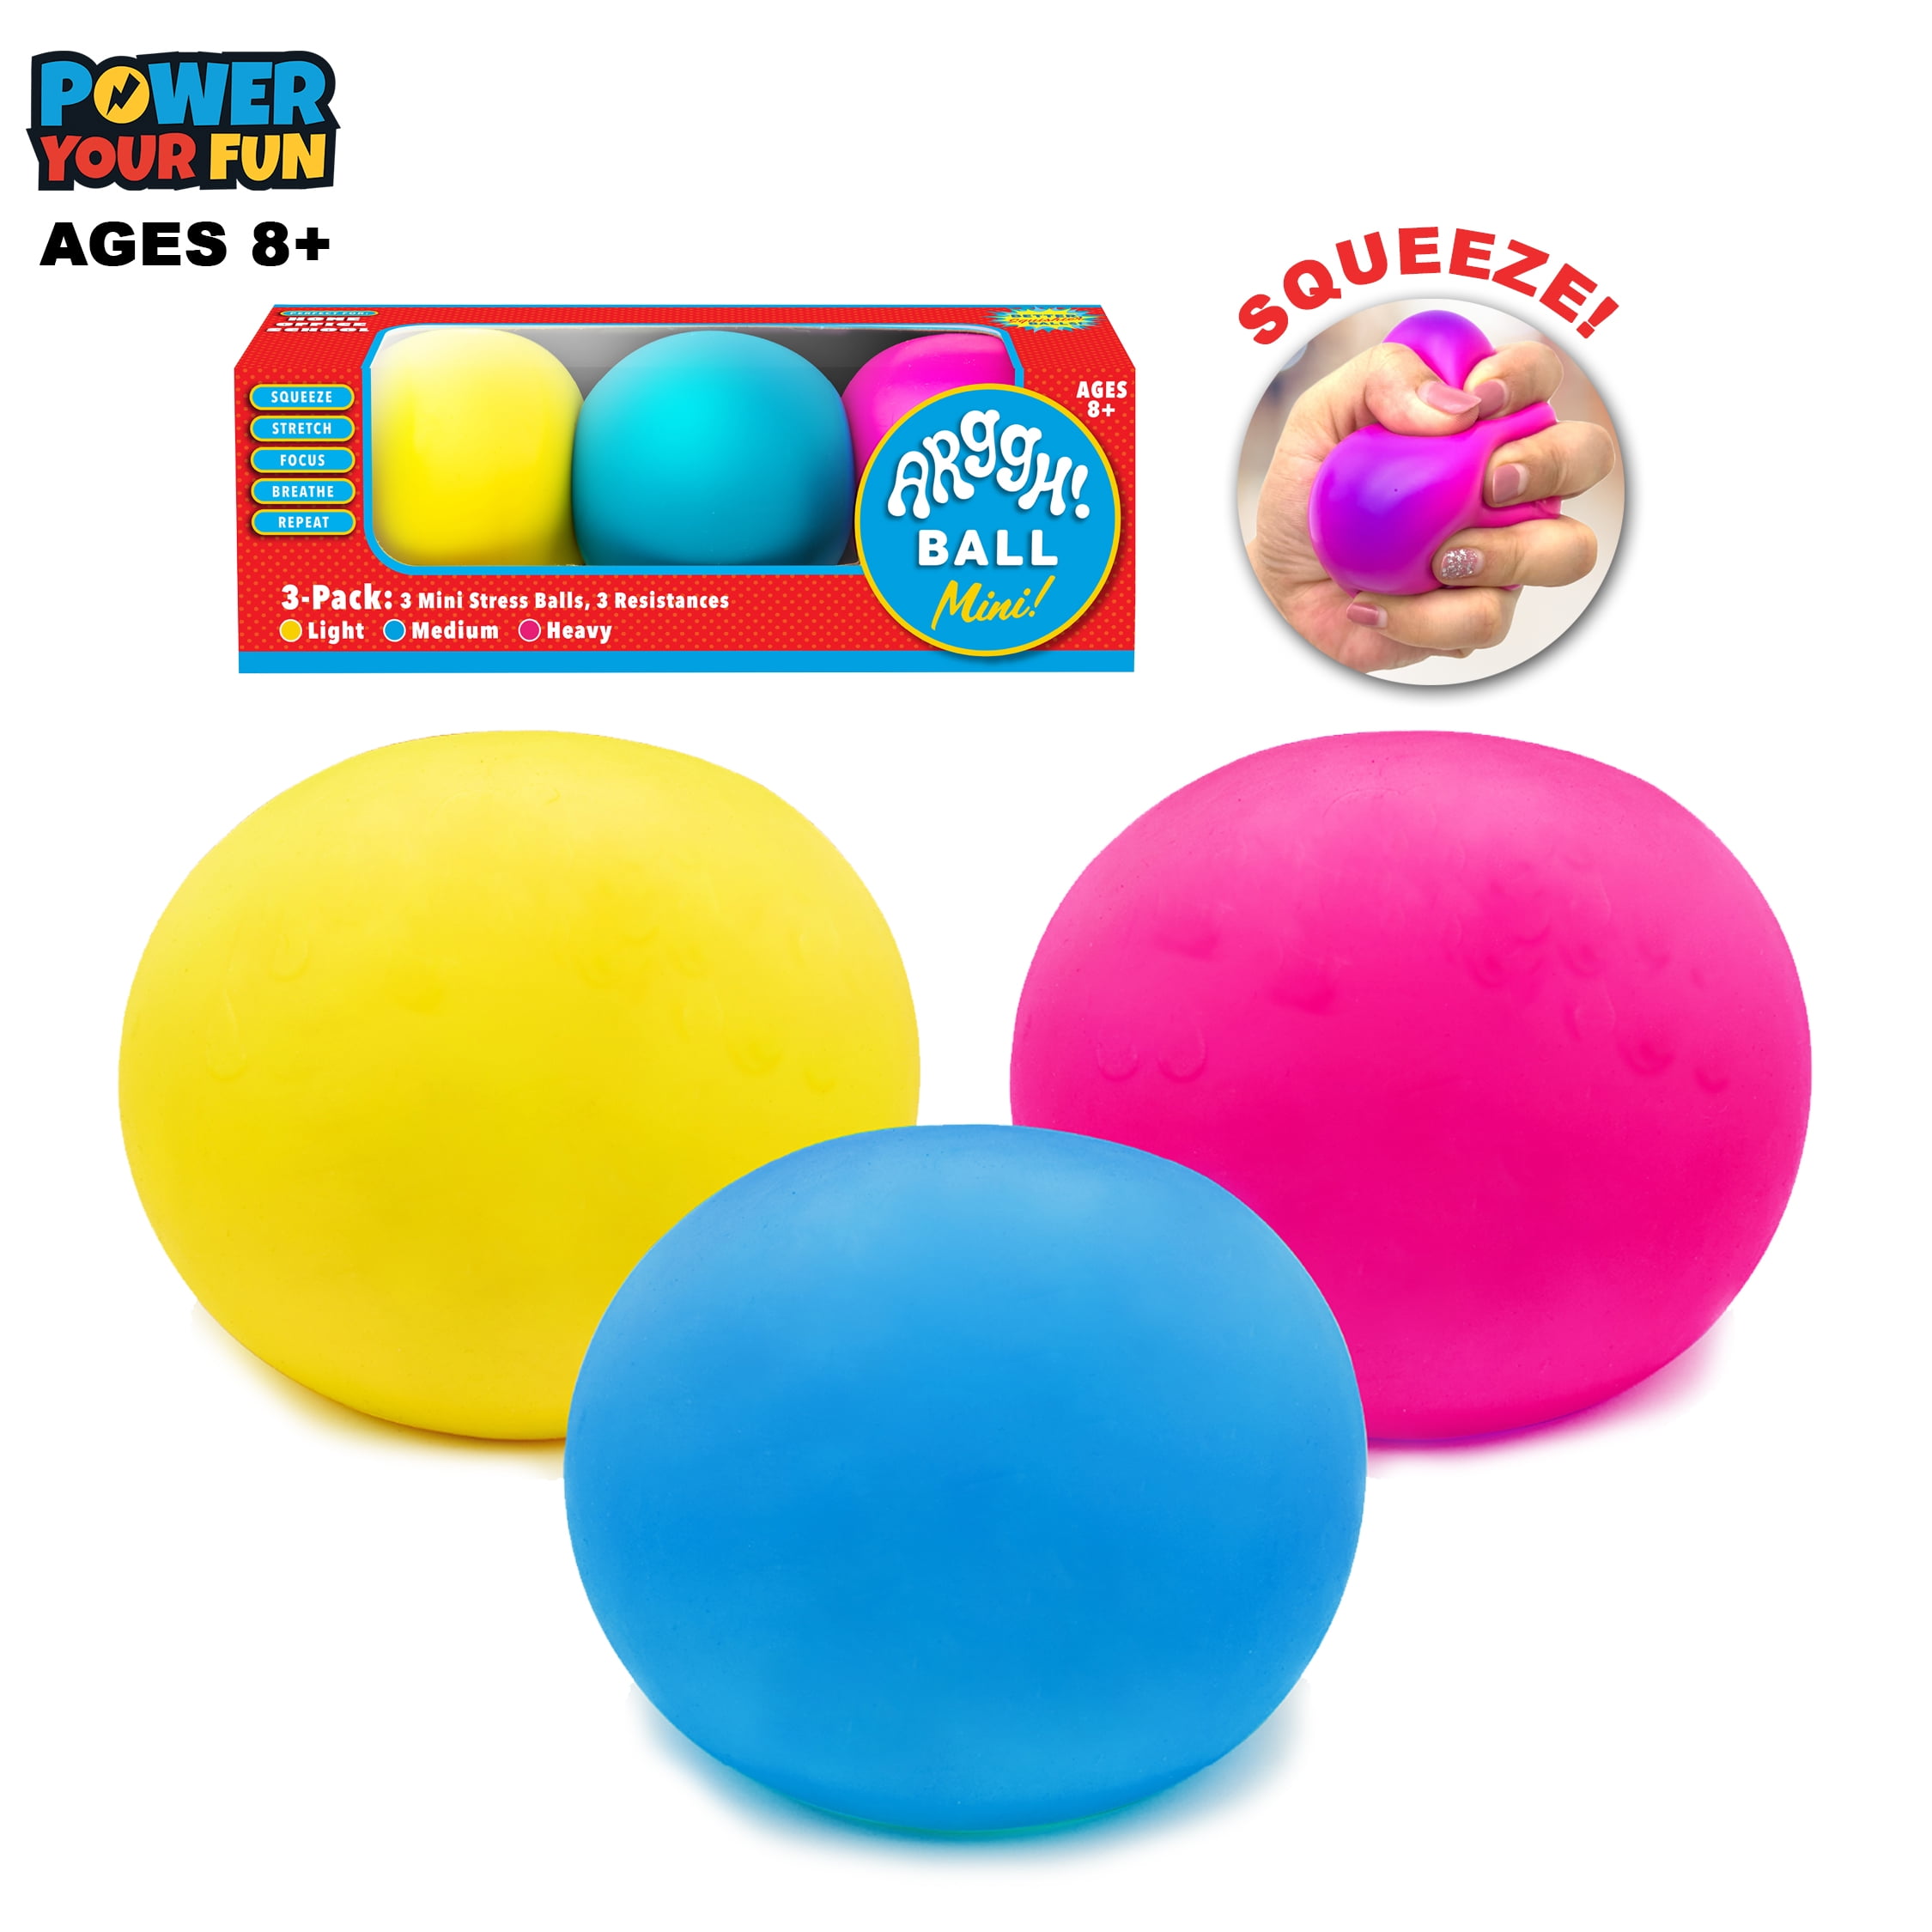 Power Your Fun Arggh! Color Changing Giant Stress Ball – poweryourfun